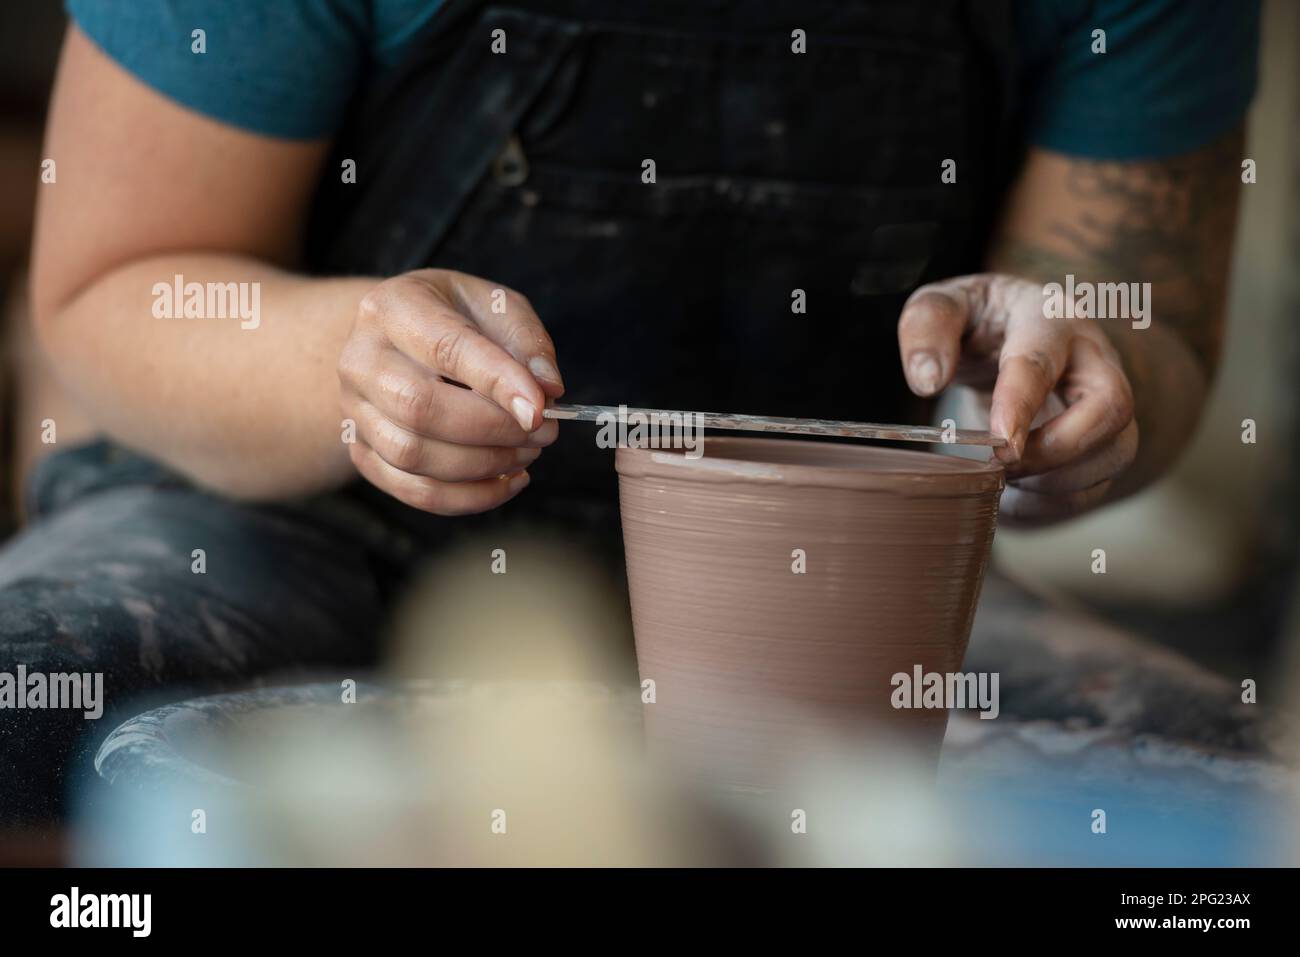 Potter crafting a pot on pottery wheel Stock Photo